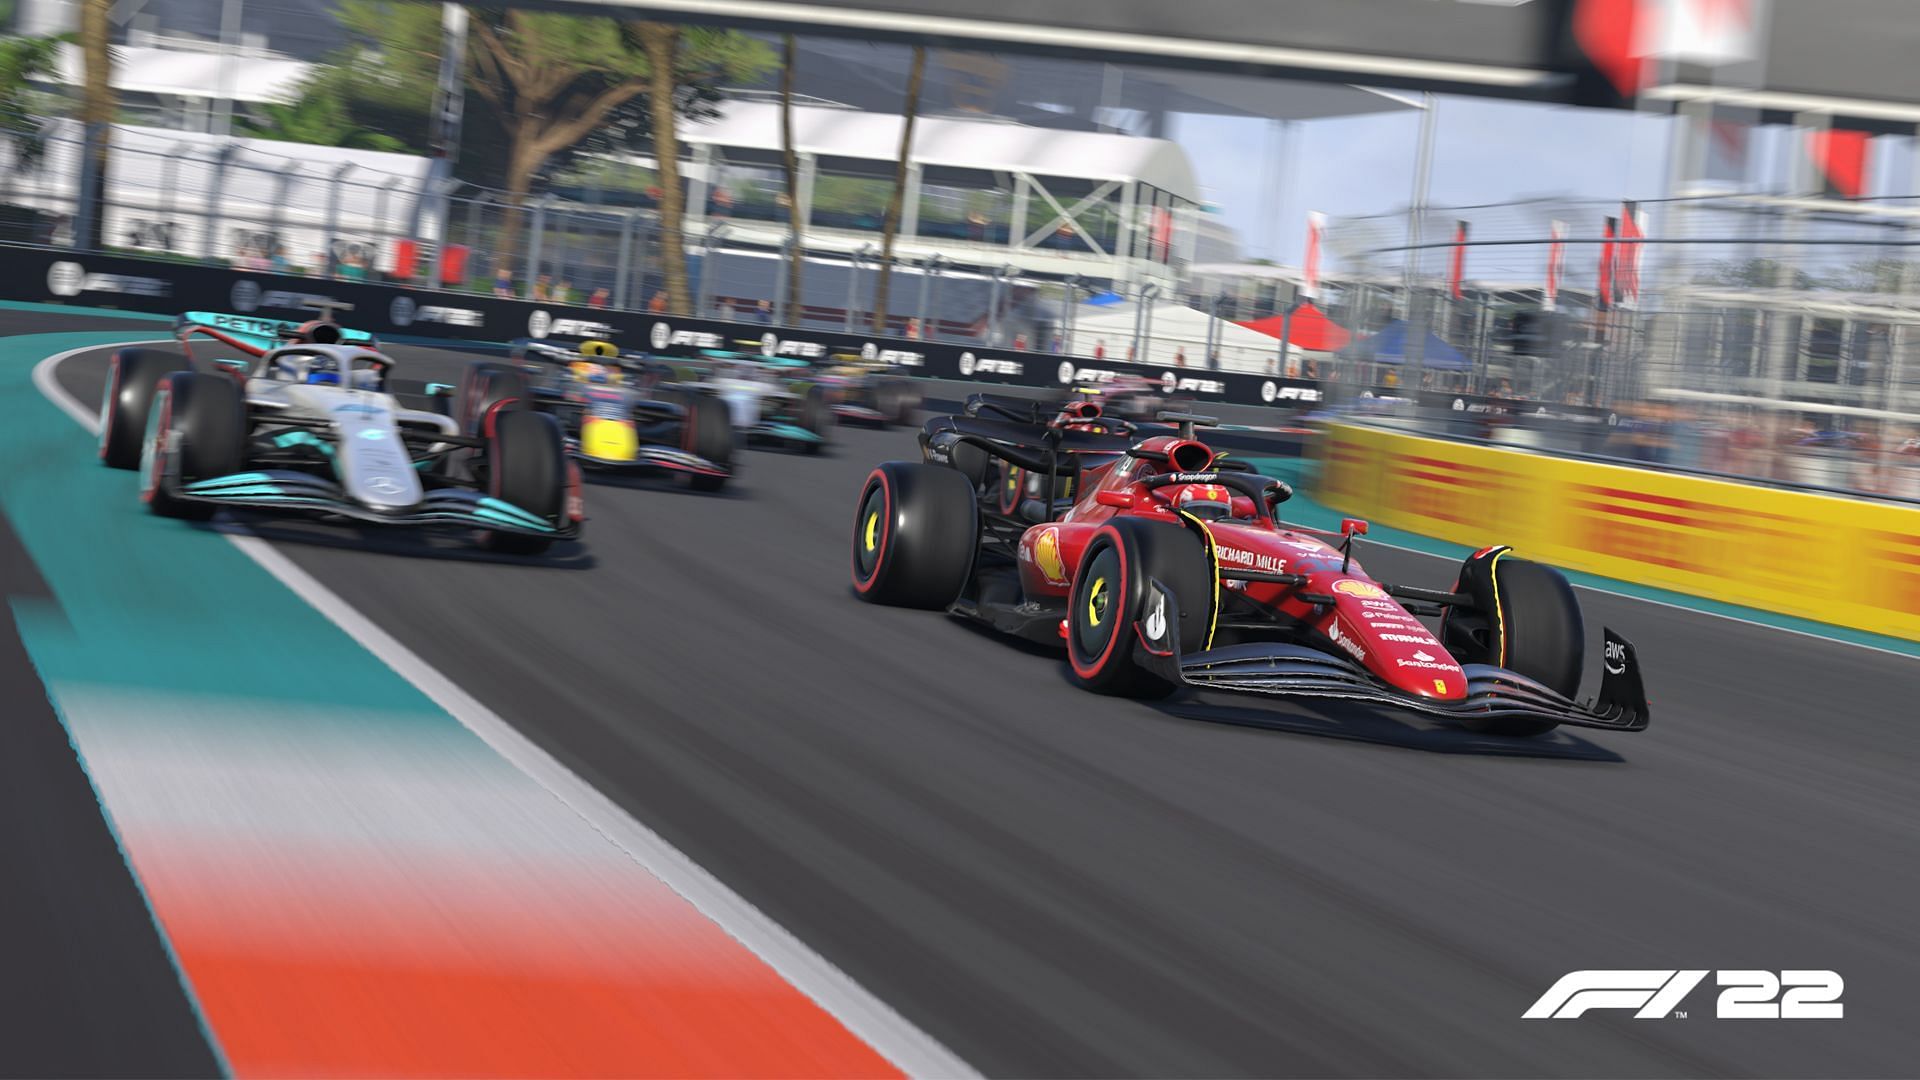 Absolute control over the vehicle will see high speeds maintained in F1 22 (Image via Codemasters)